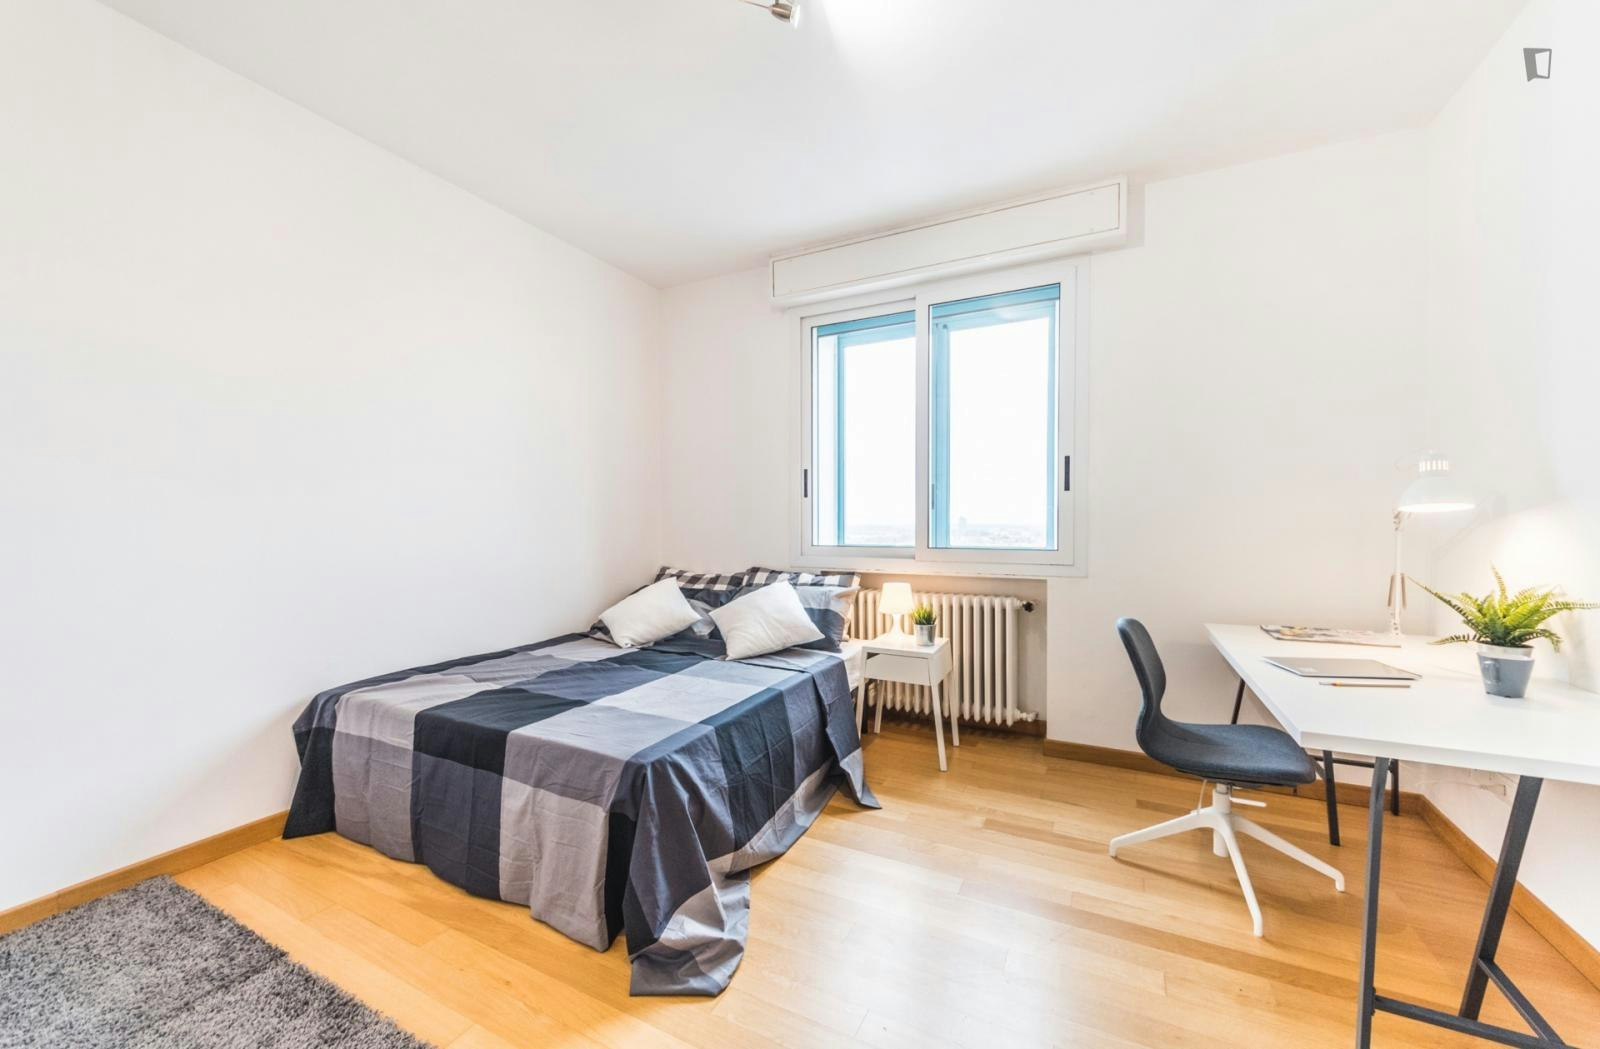 Comfortable single bedroom close to the central train station